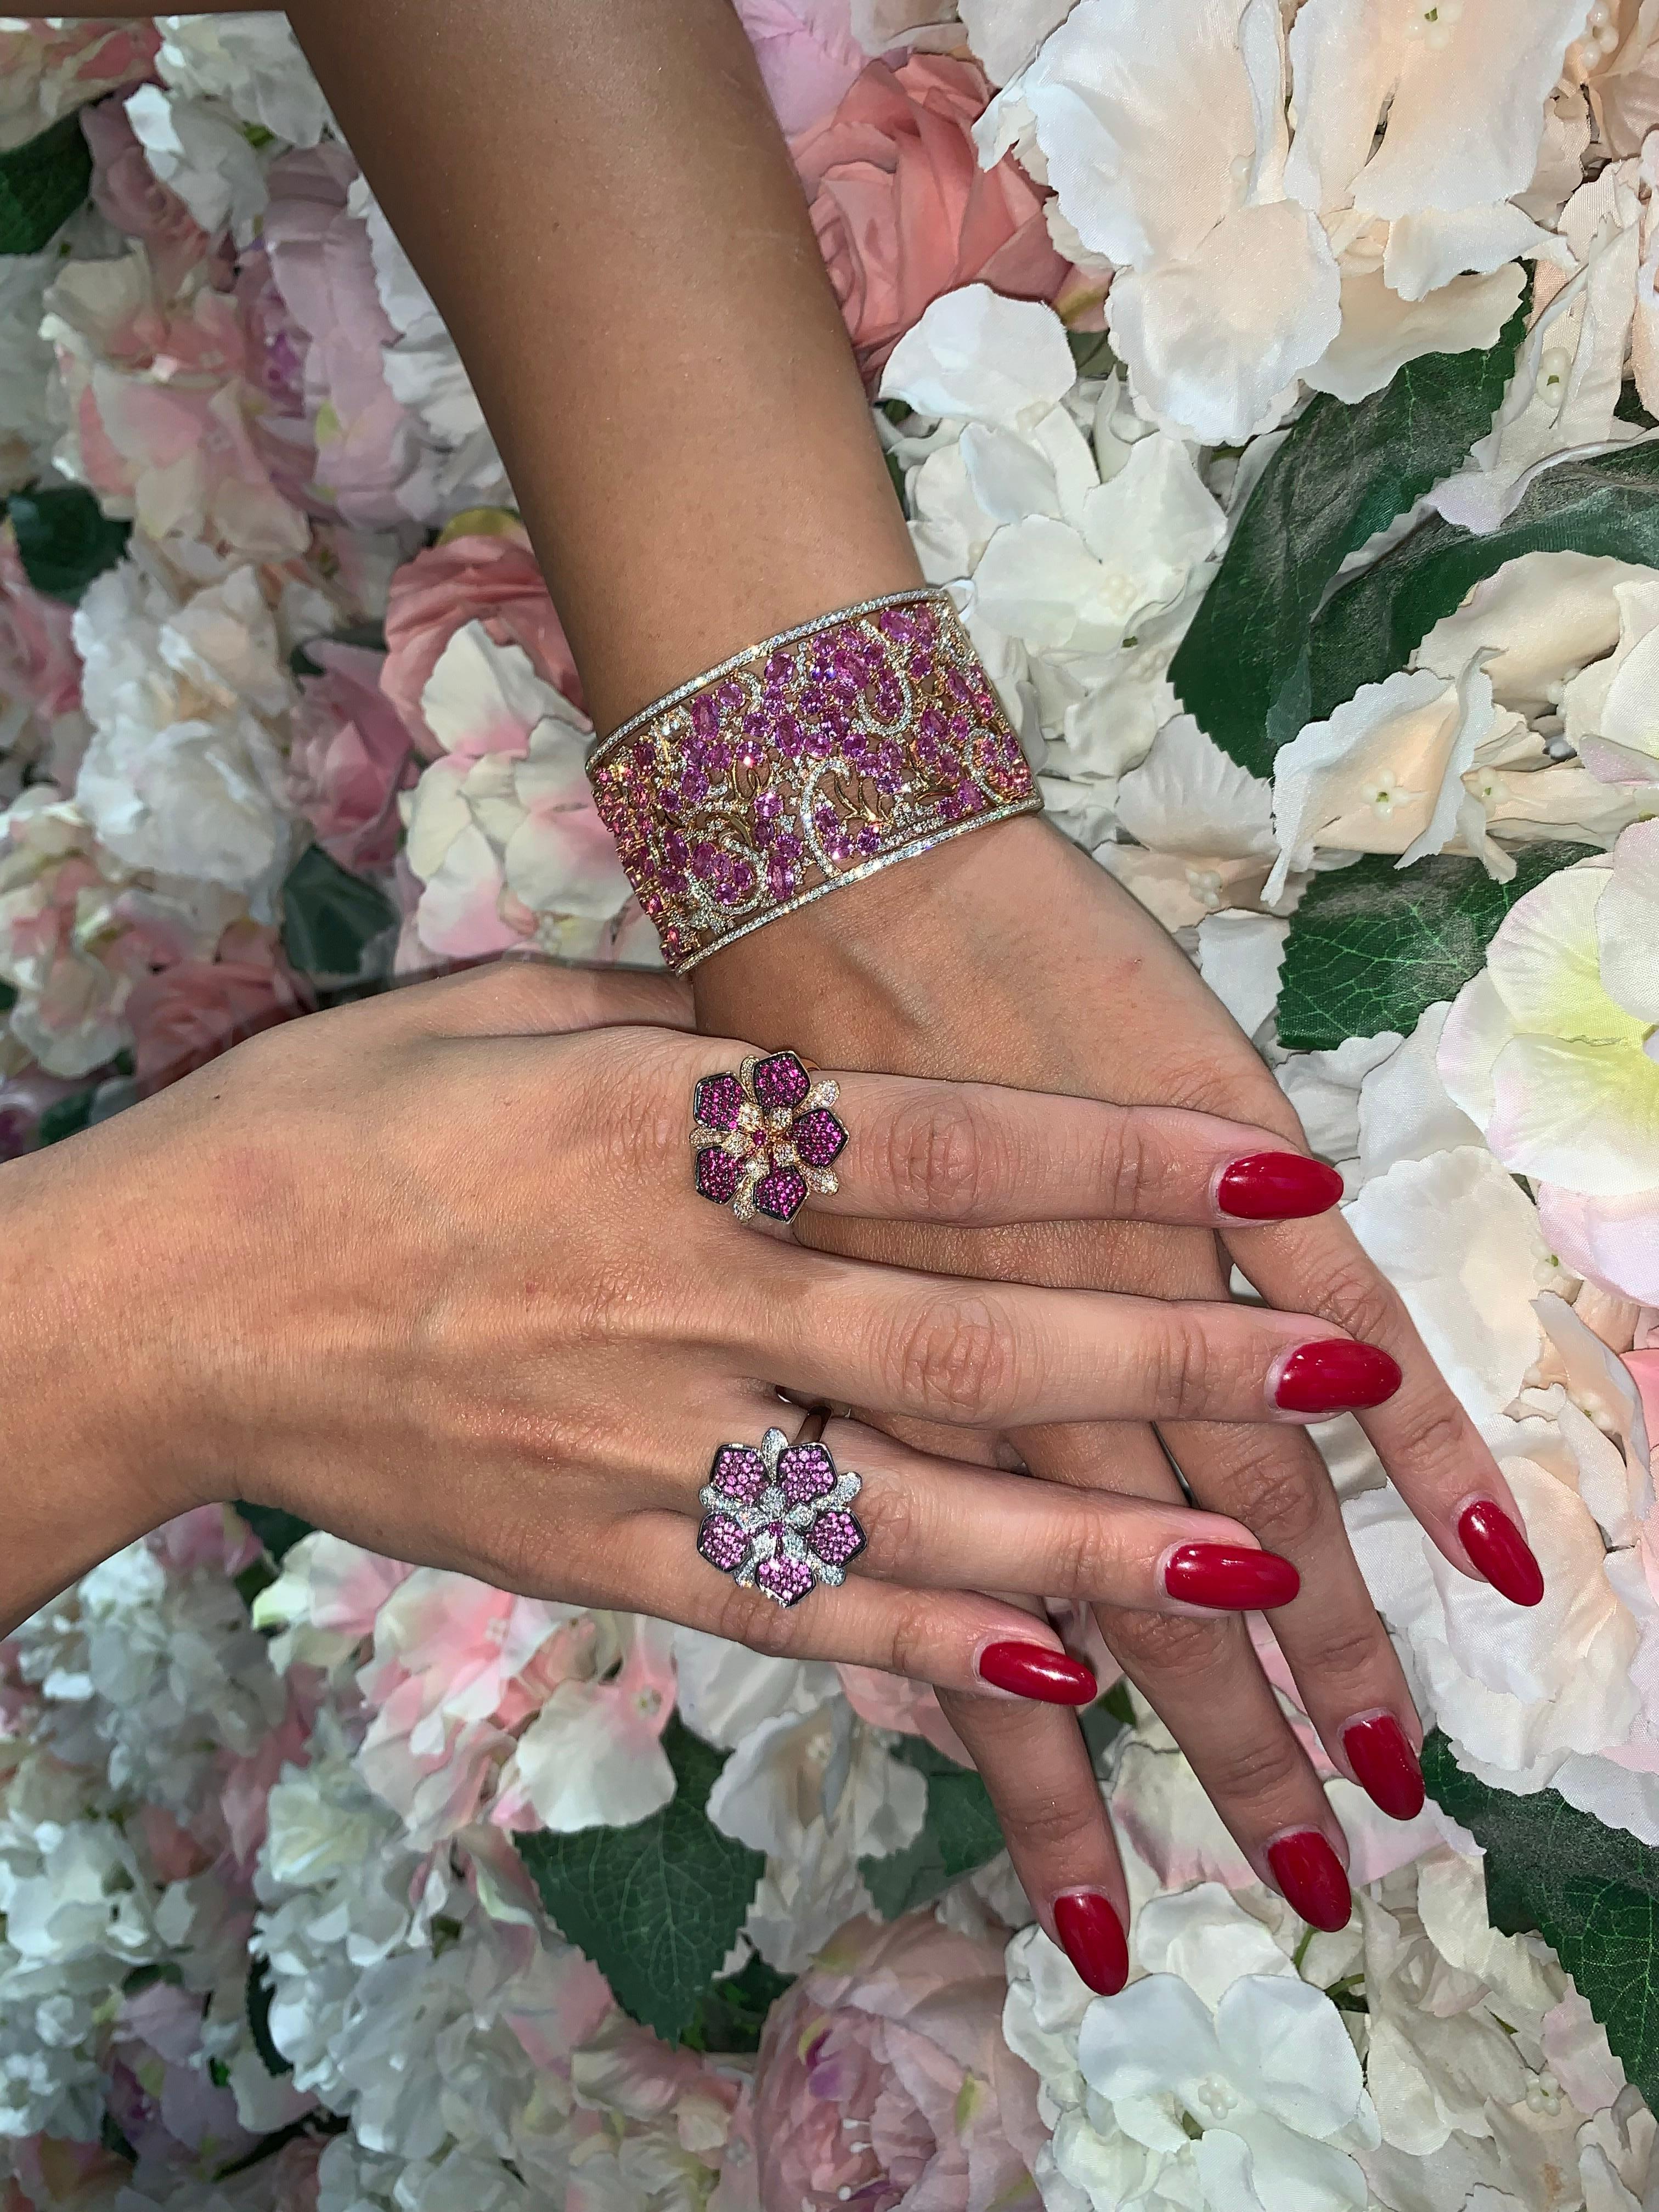 This ring is part of the exclusive Floral Fantasy Collection presented by Sunita Nahata. These simple floral designs are given an elegant touch with the multi layered architectural construction of the pieces. In addition, these rings are accented by